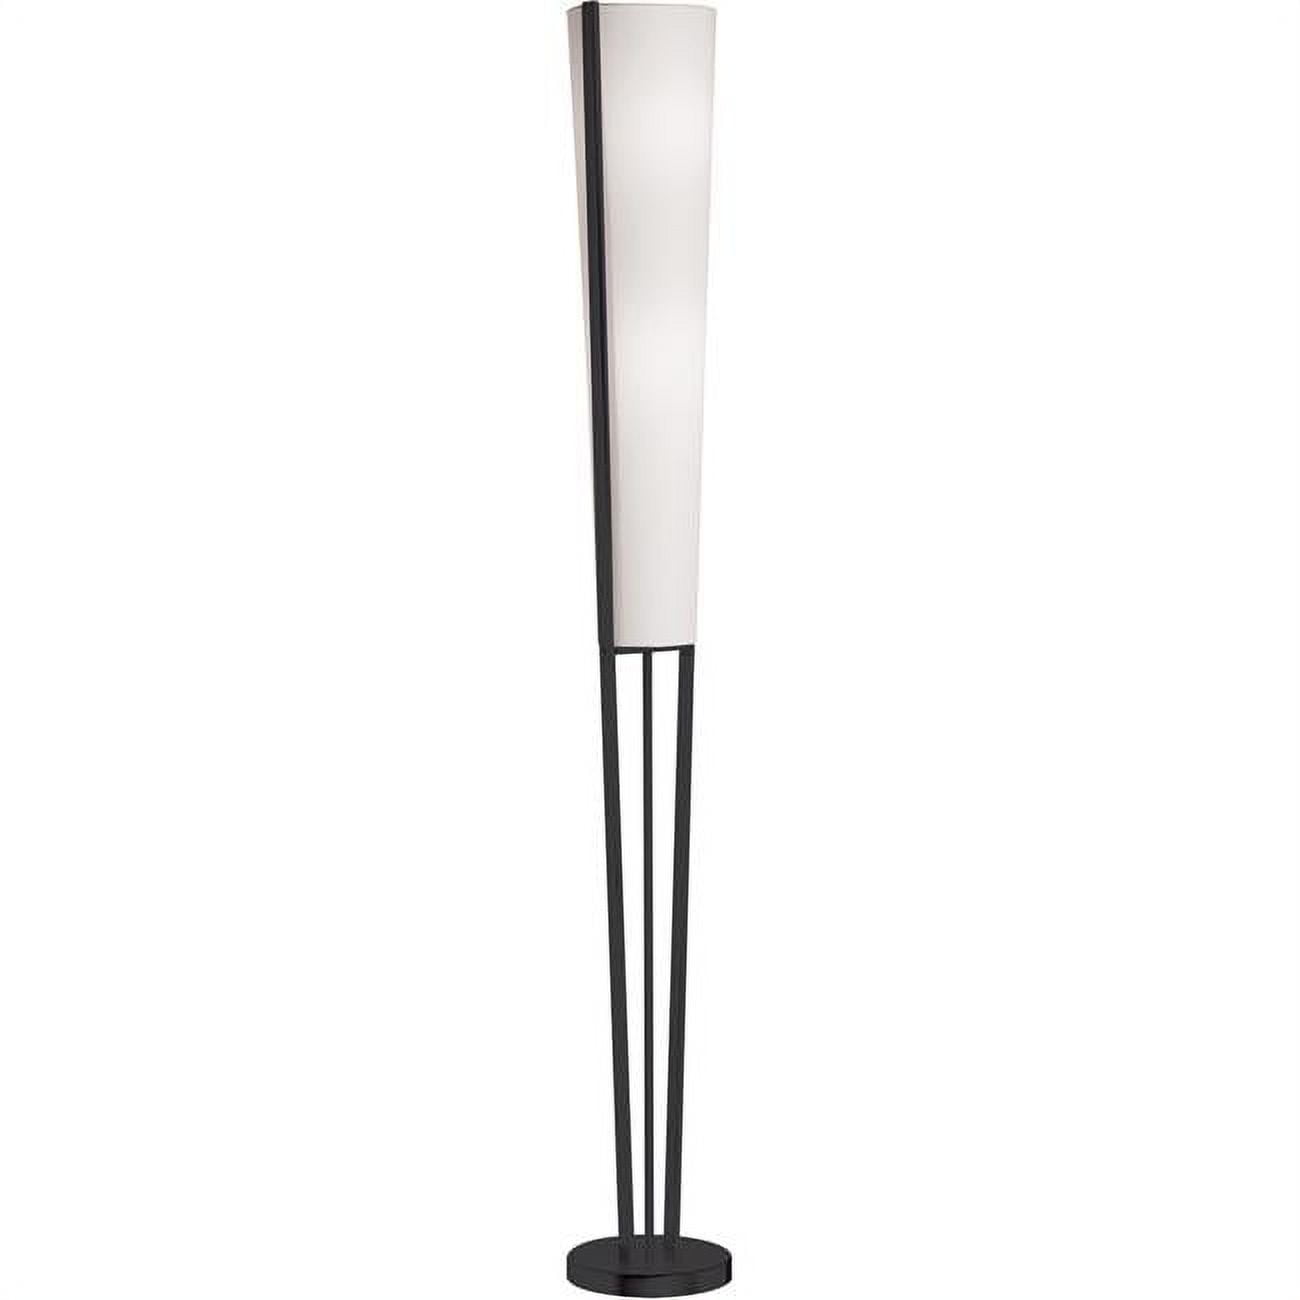 Picture of Dainolite 83323F-MB 2 Light Incandescent Floor Lamp, Matte Black with White Shade